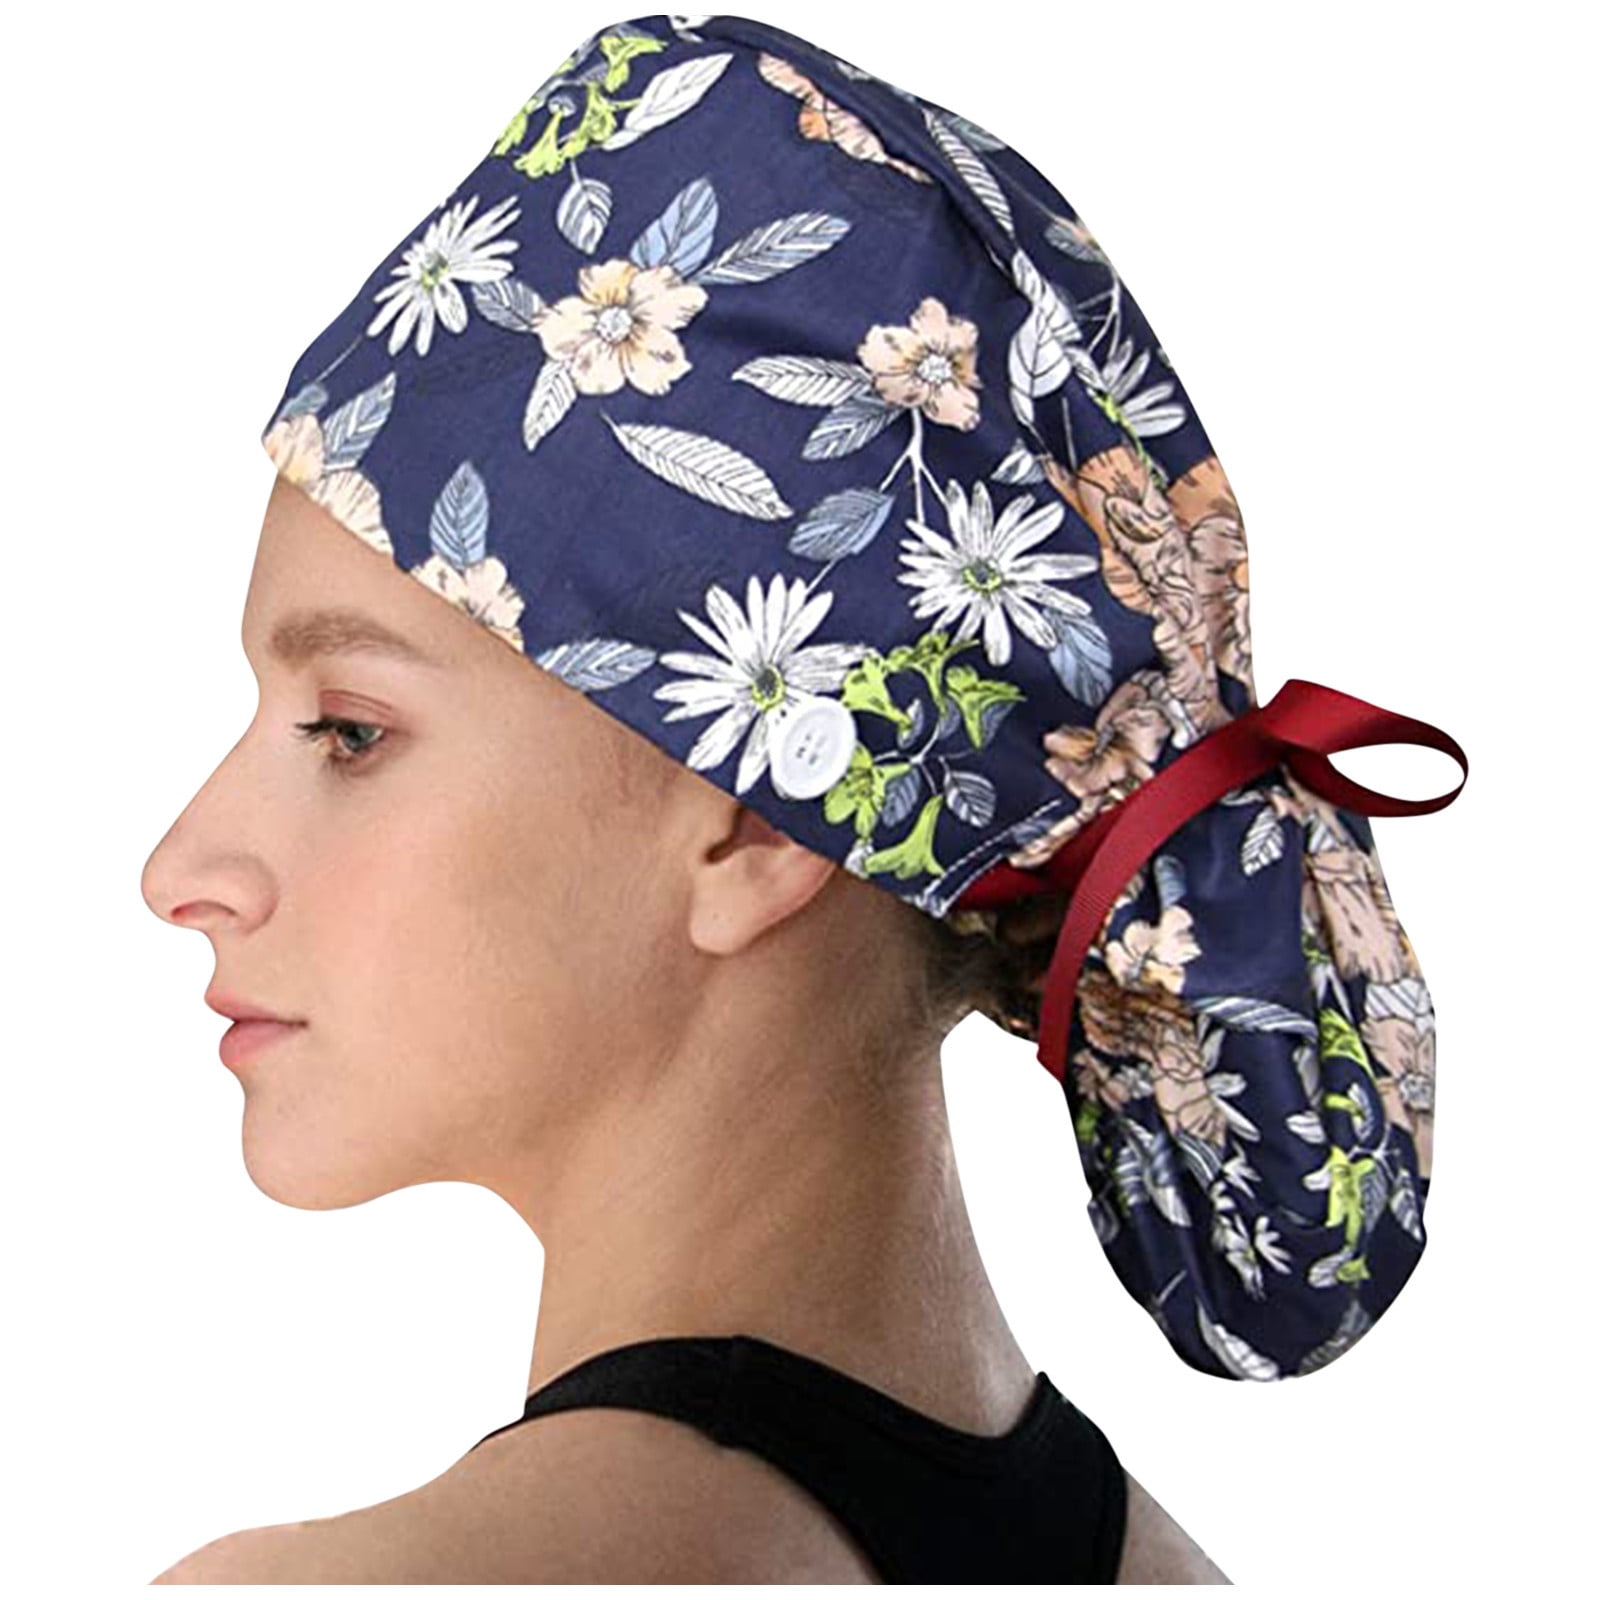 Scrub cap bouffant with buttons sweat band and face mask set